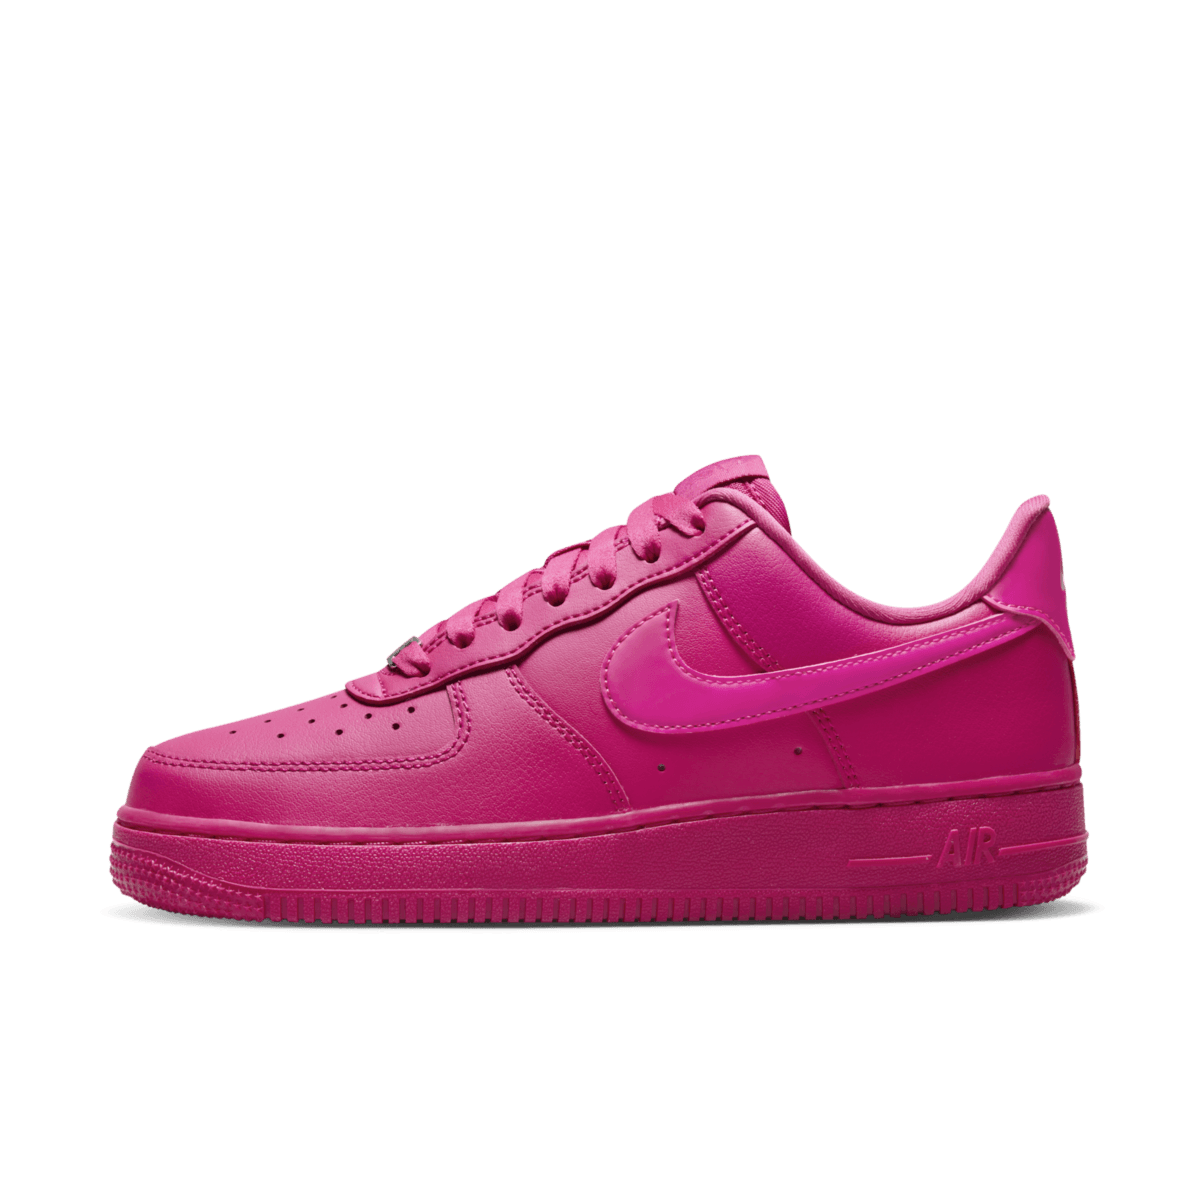 Nike Air Force 1 Low 'Fireberry' DD8959-600